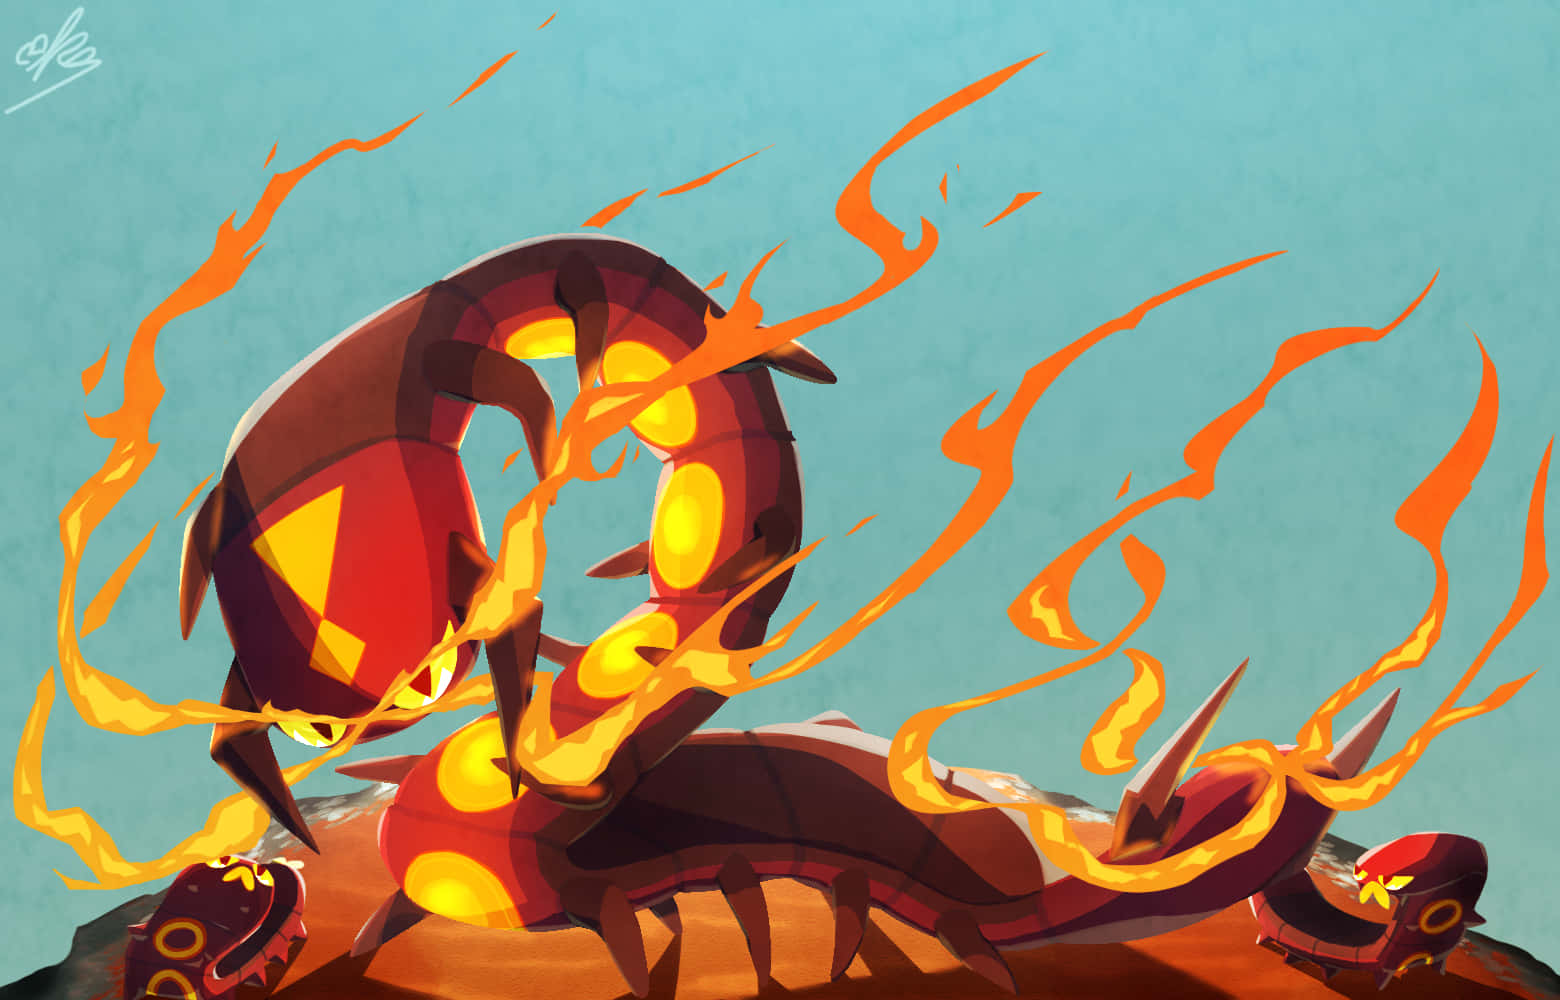 Burn through any challenge with the fierce Sizzlipede Wallpaper